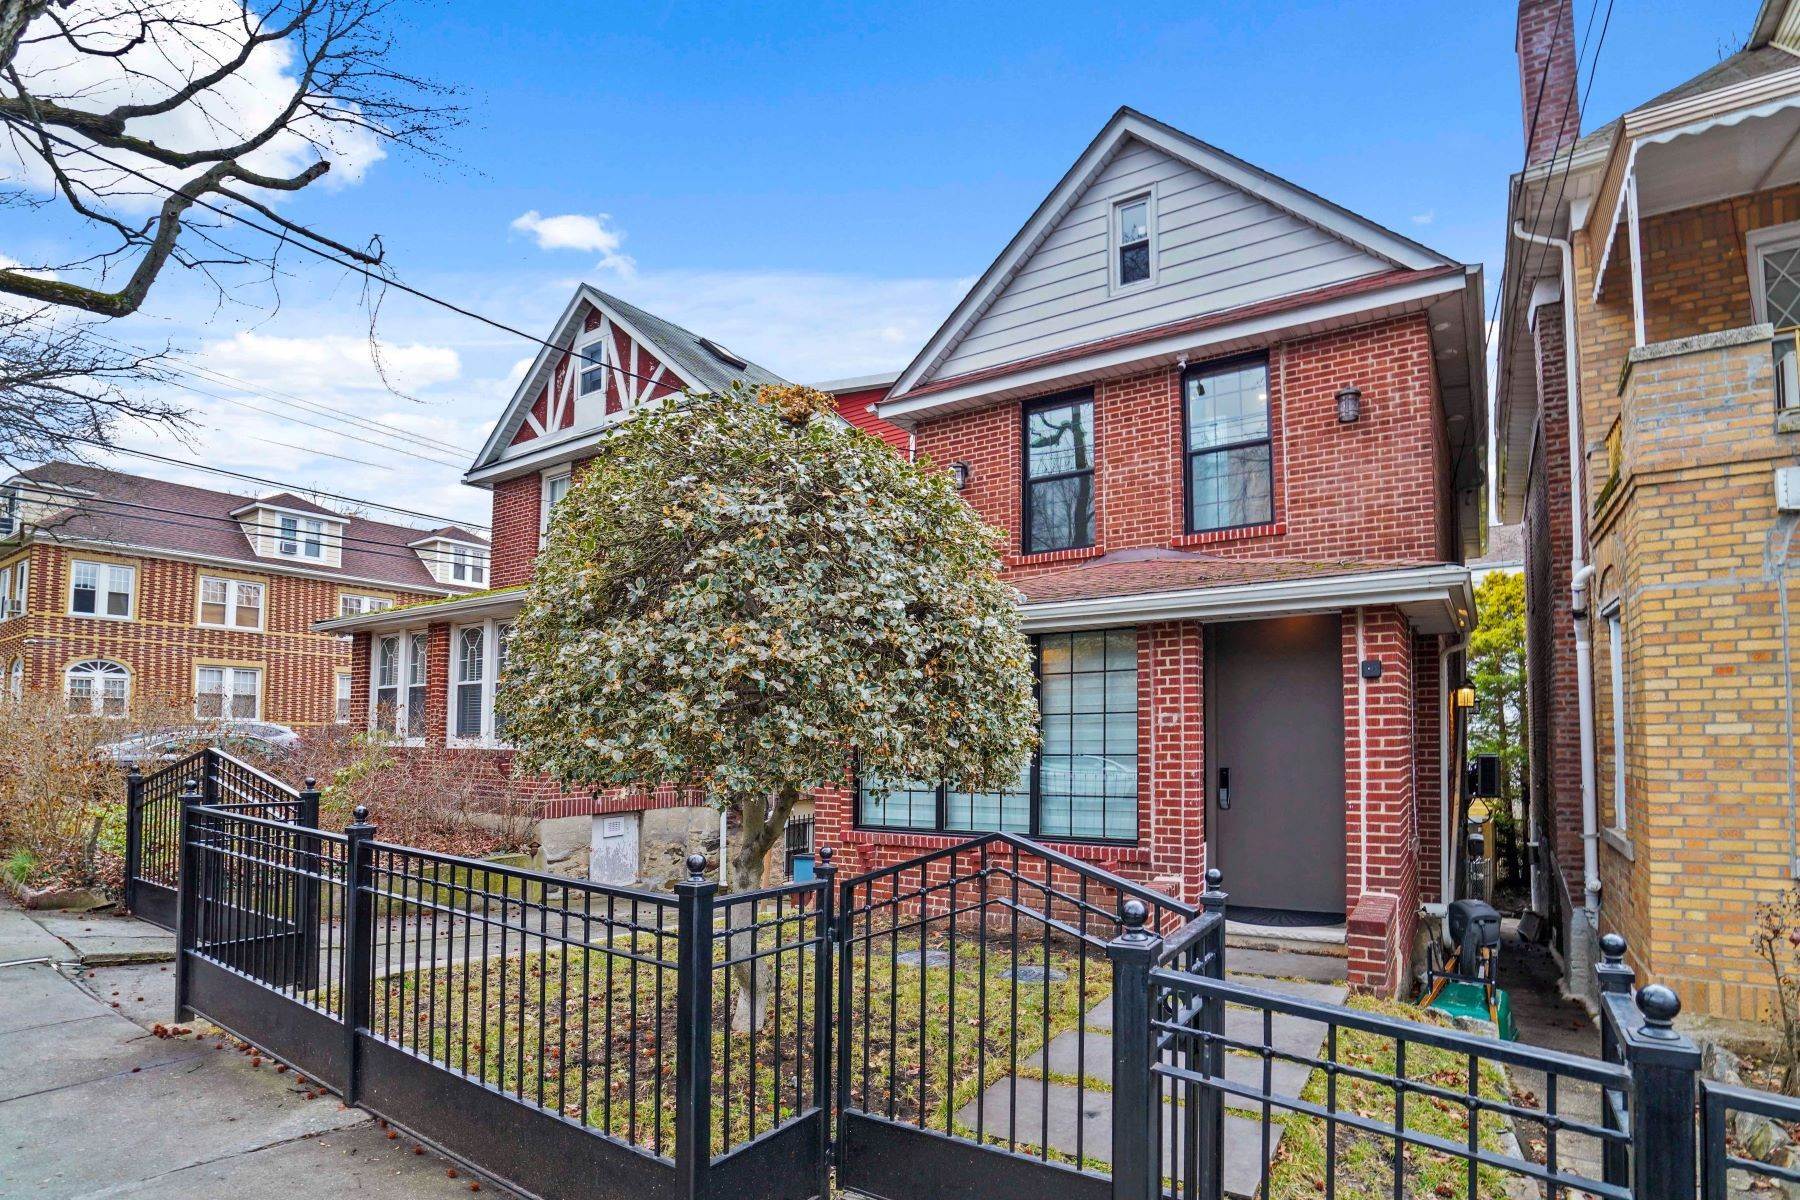 Single Family Homes for Sale at 437 West 261st Street, North Riverdale, NY 10471 437 West 261st Street Bronx, New York 10471 United States